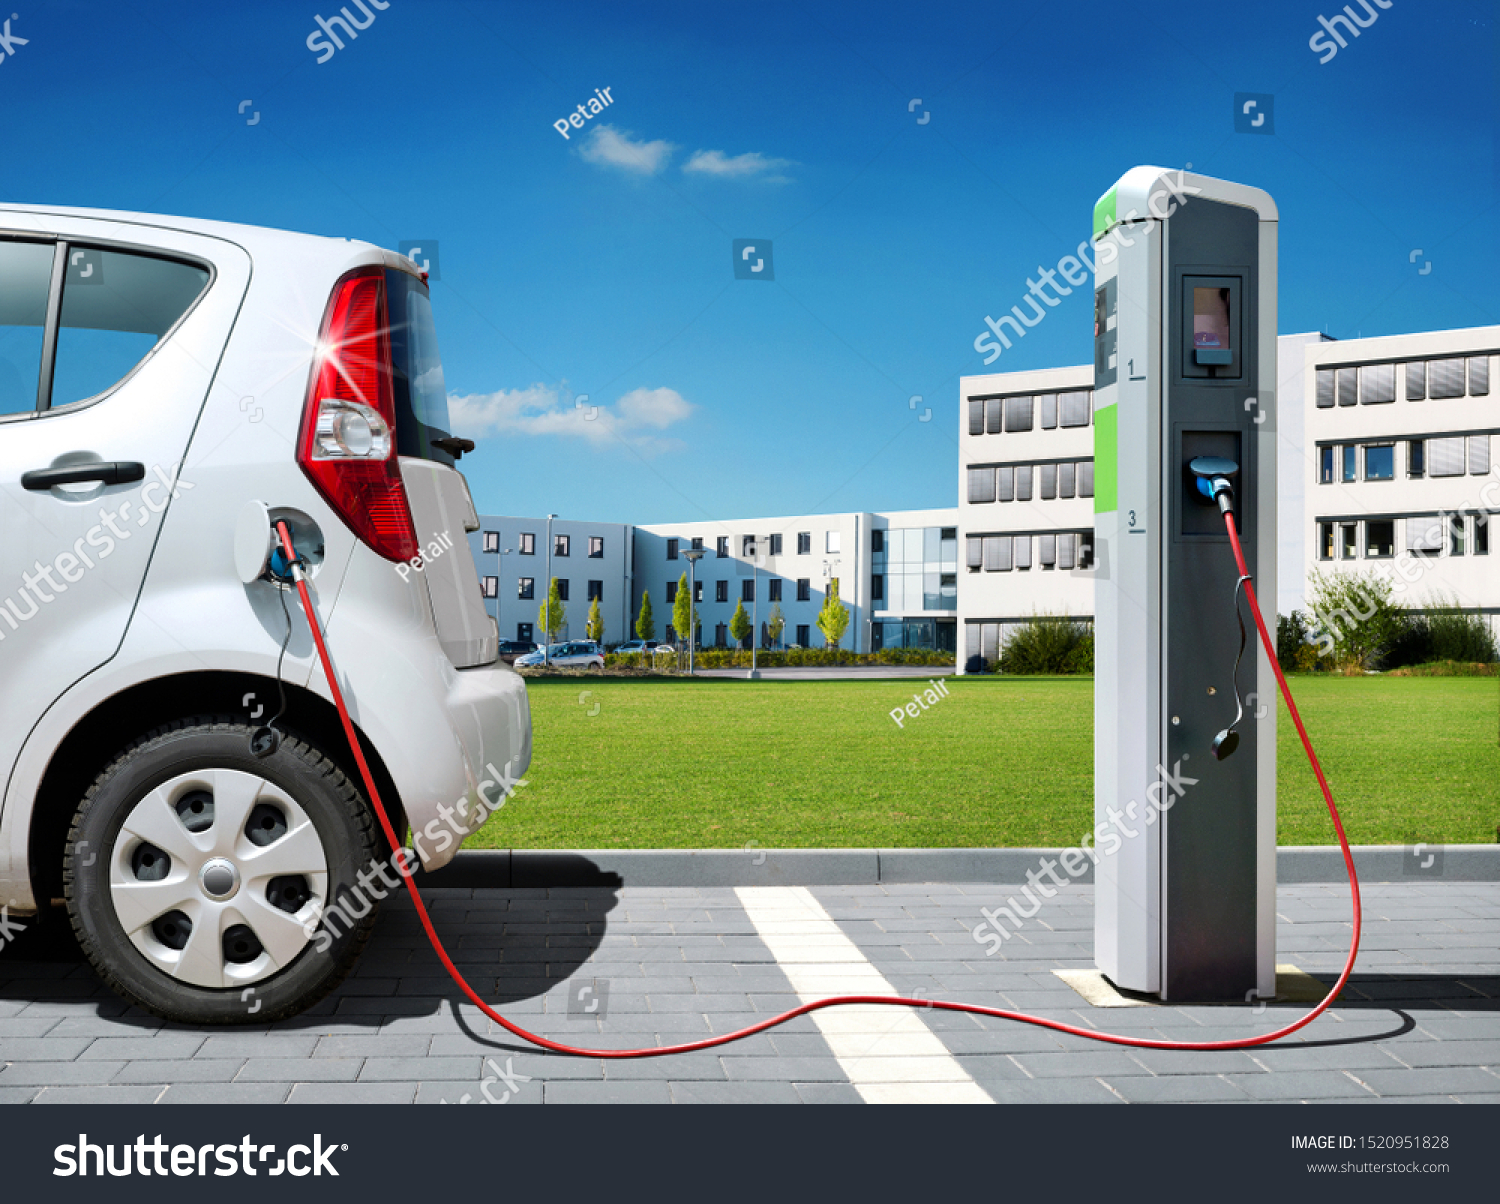 Electric car on charging spot in front of architecture office buildings - Car sharing commuter charging station #1520951828